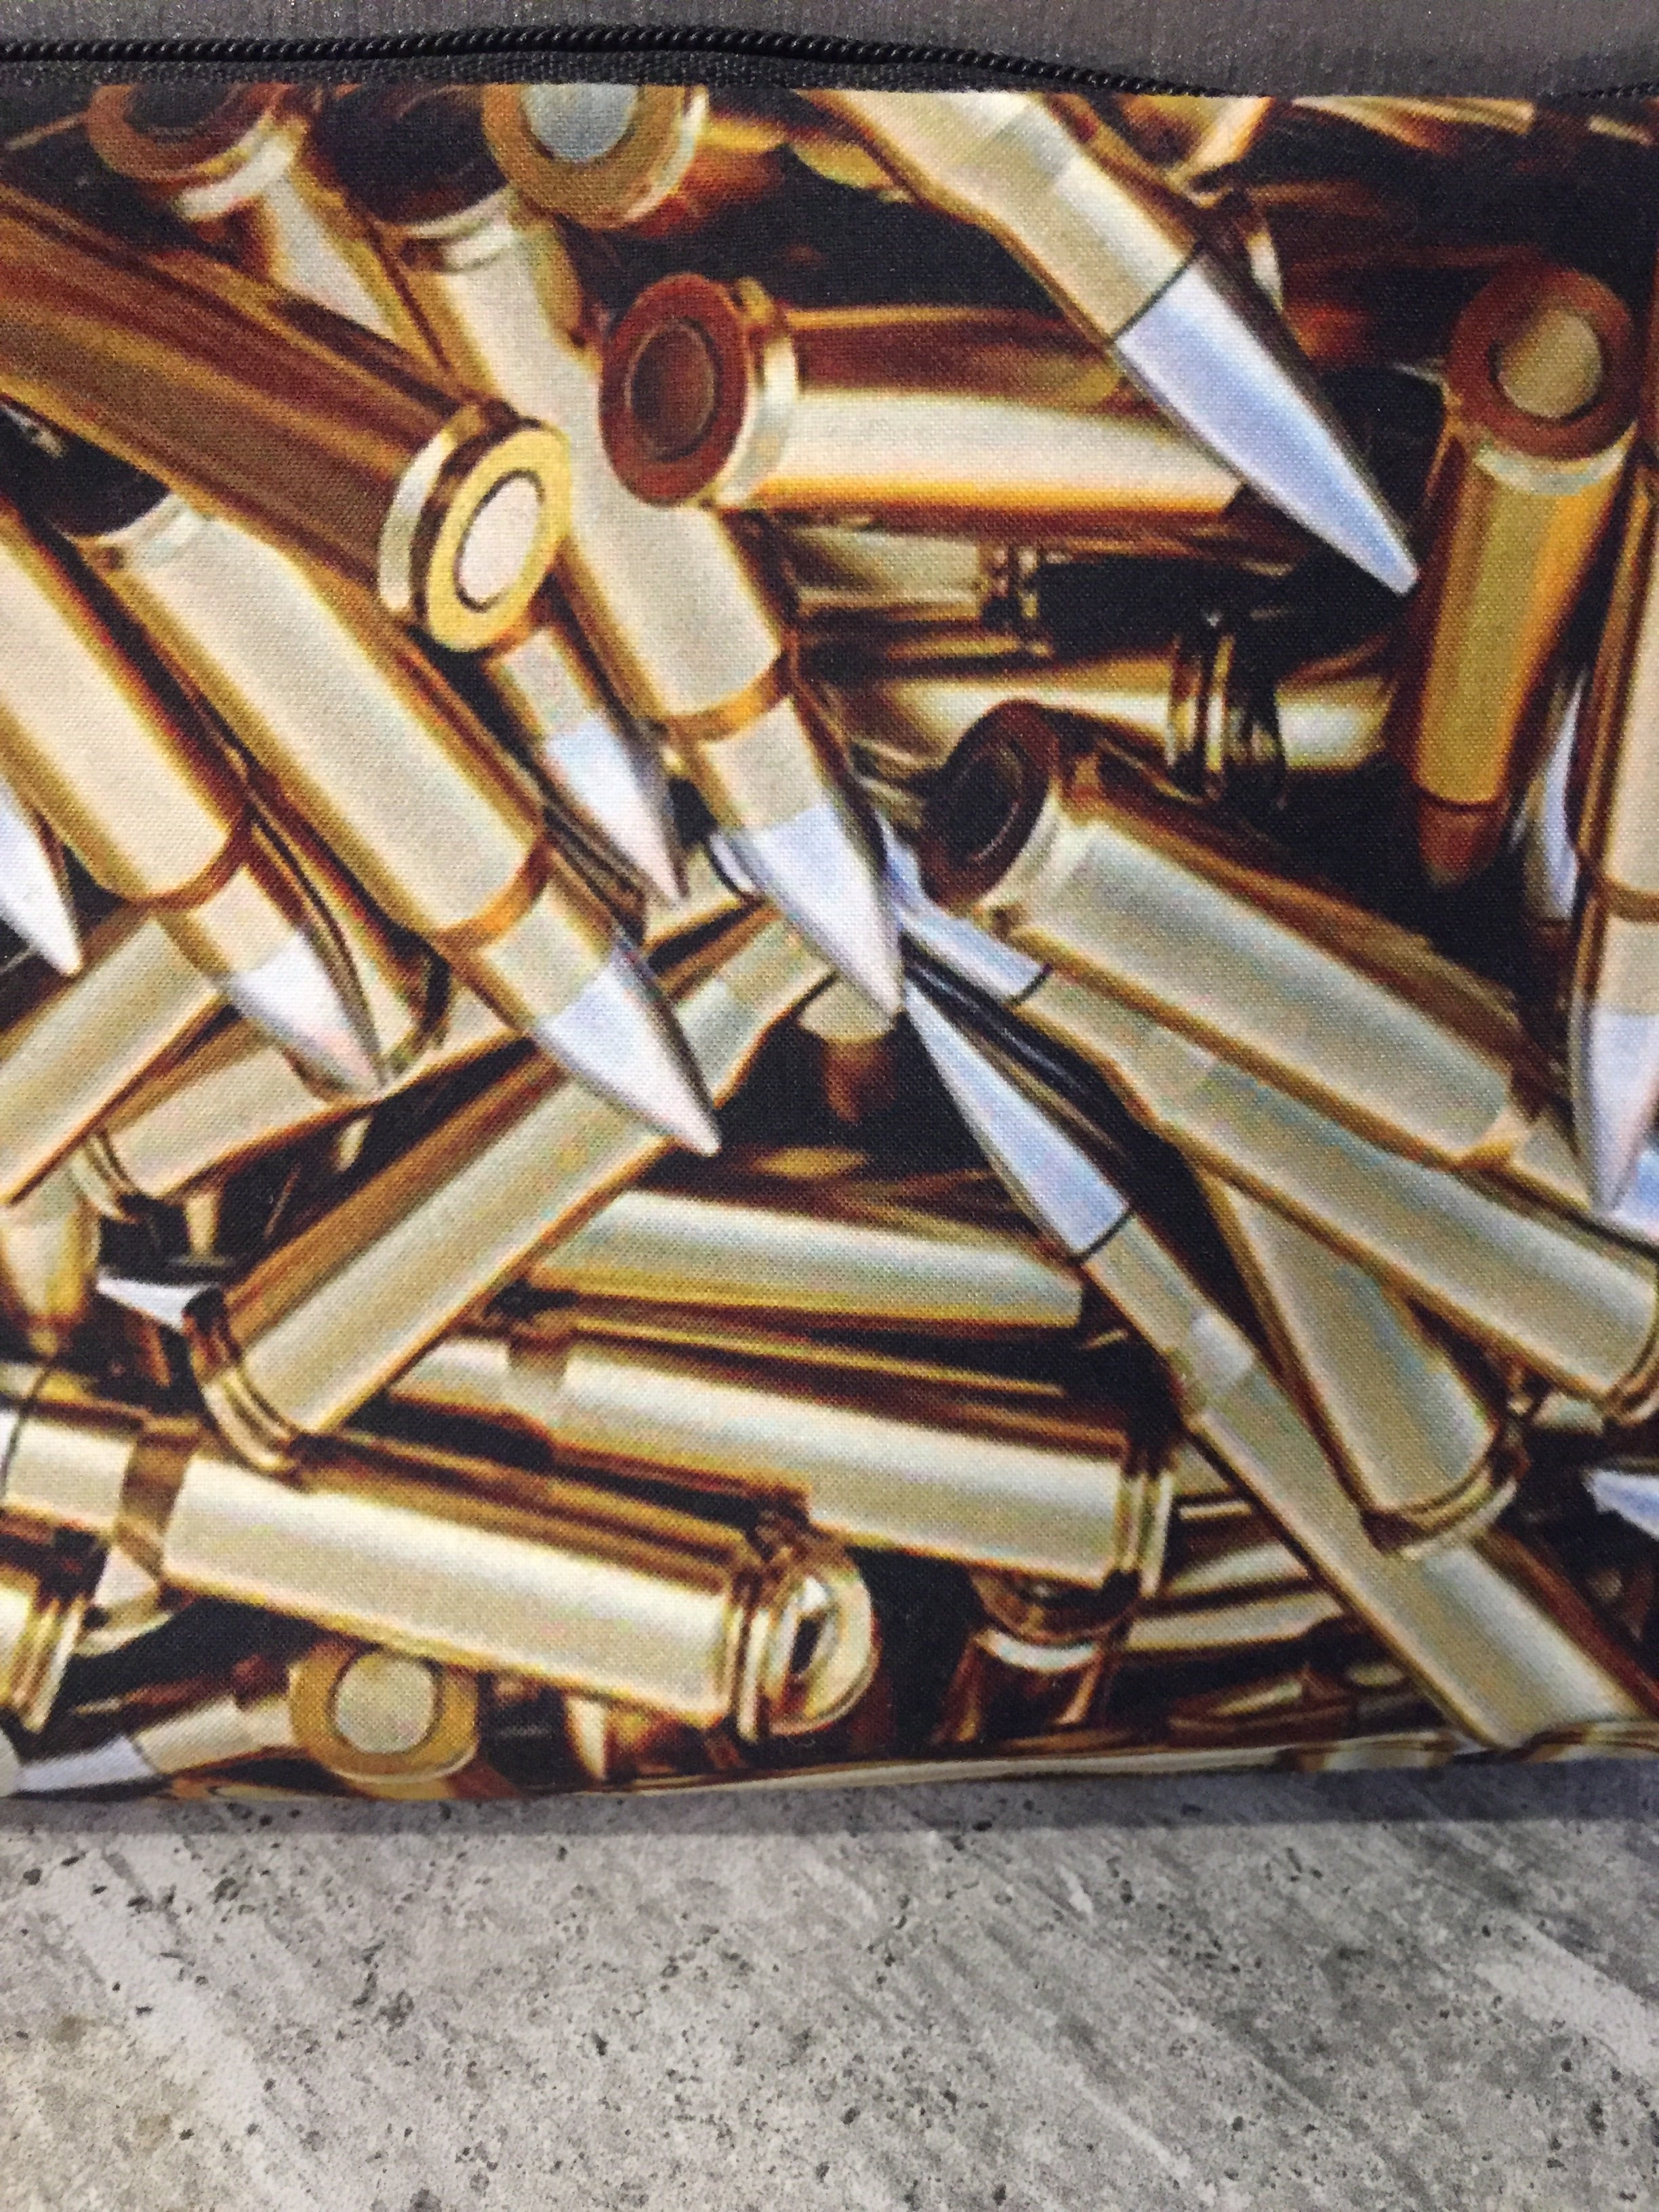 “Bullets” printed cosmetic/carry all bag